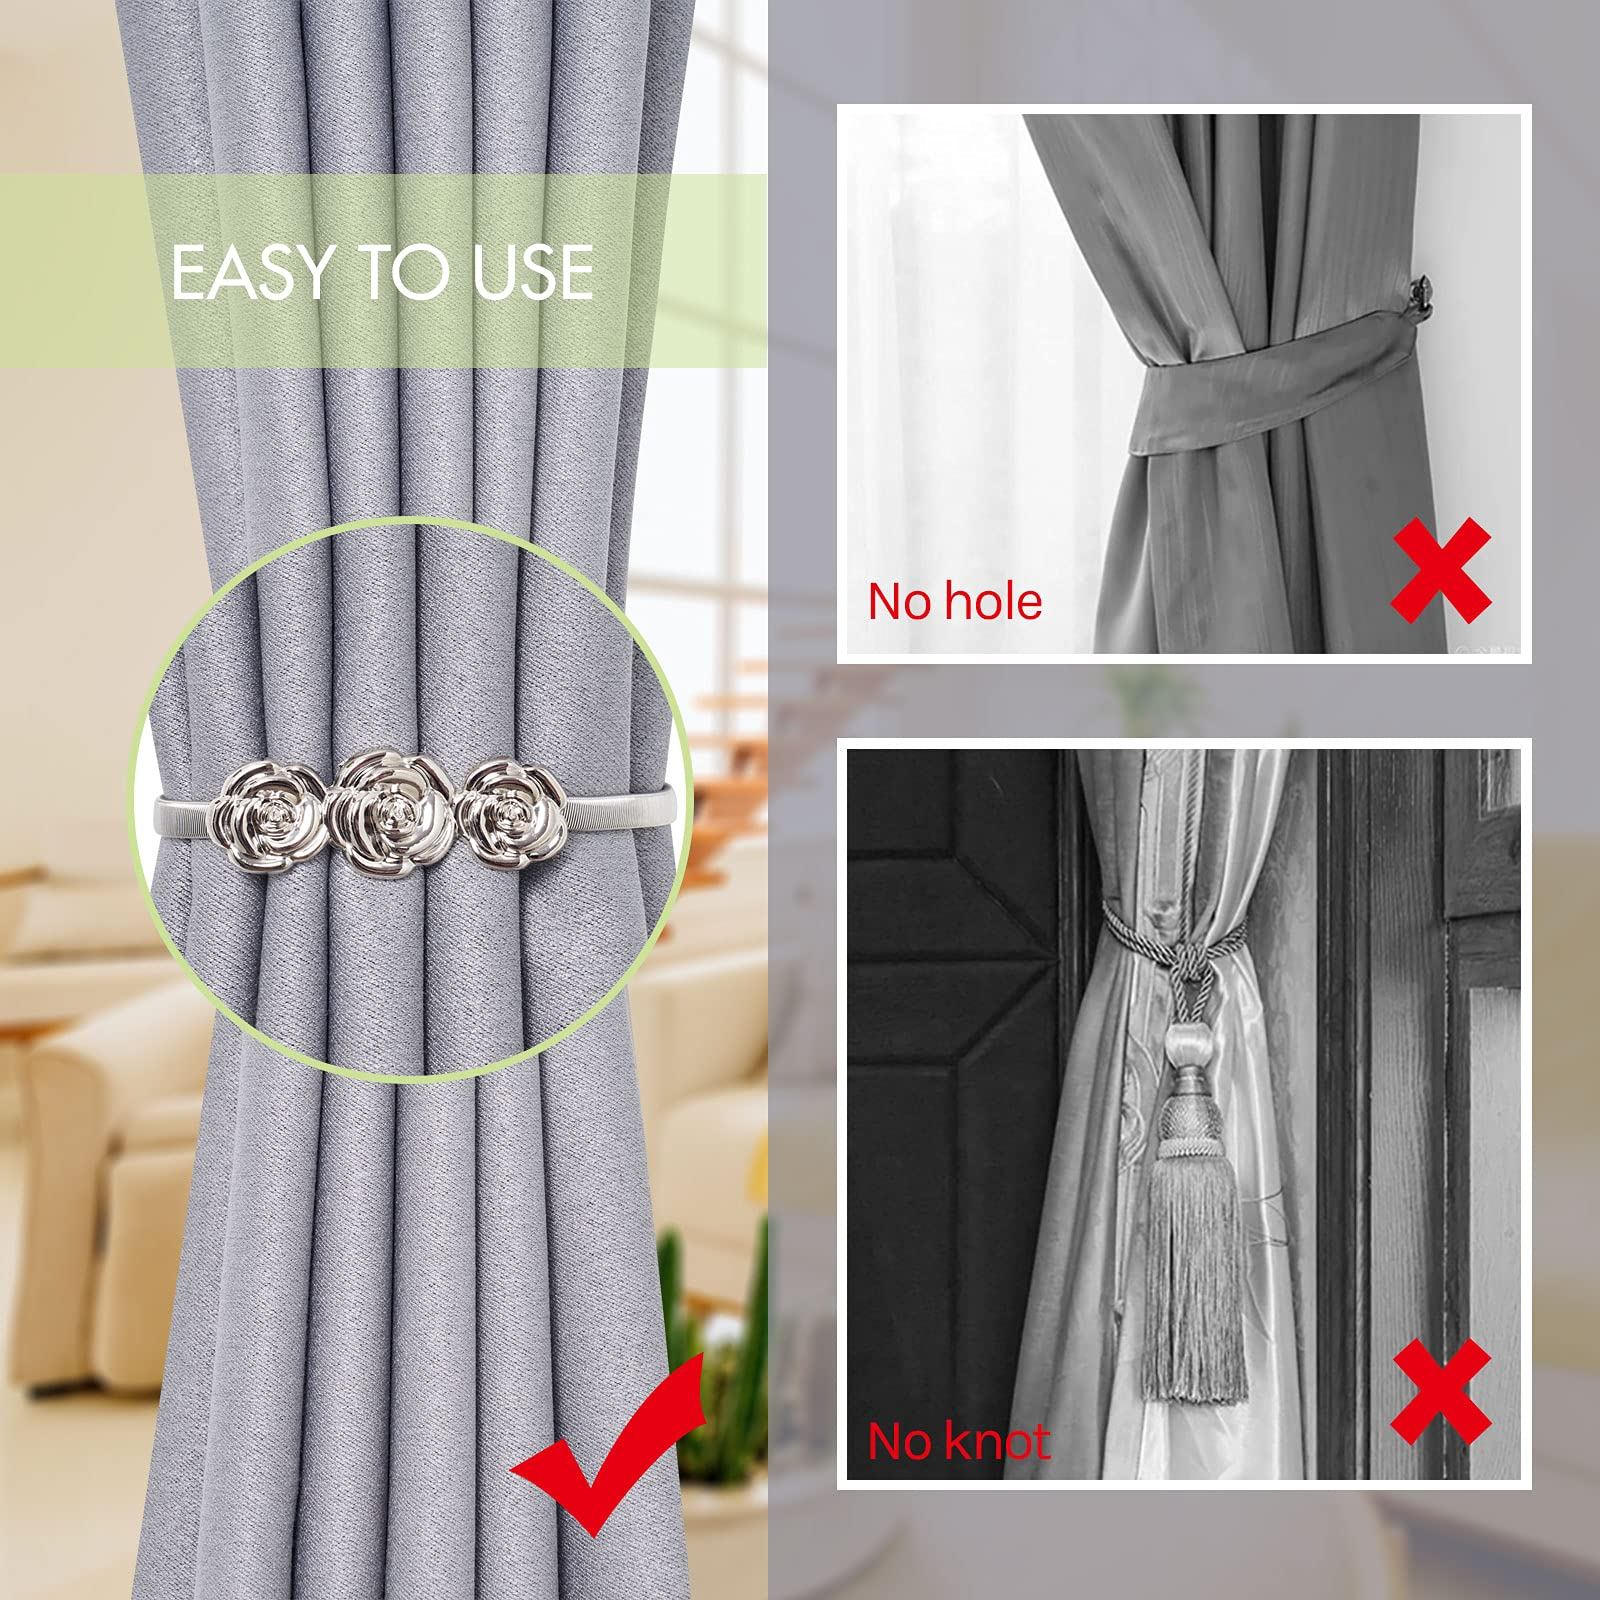 How To Make Curtain Tie Backs The Easy Way!